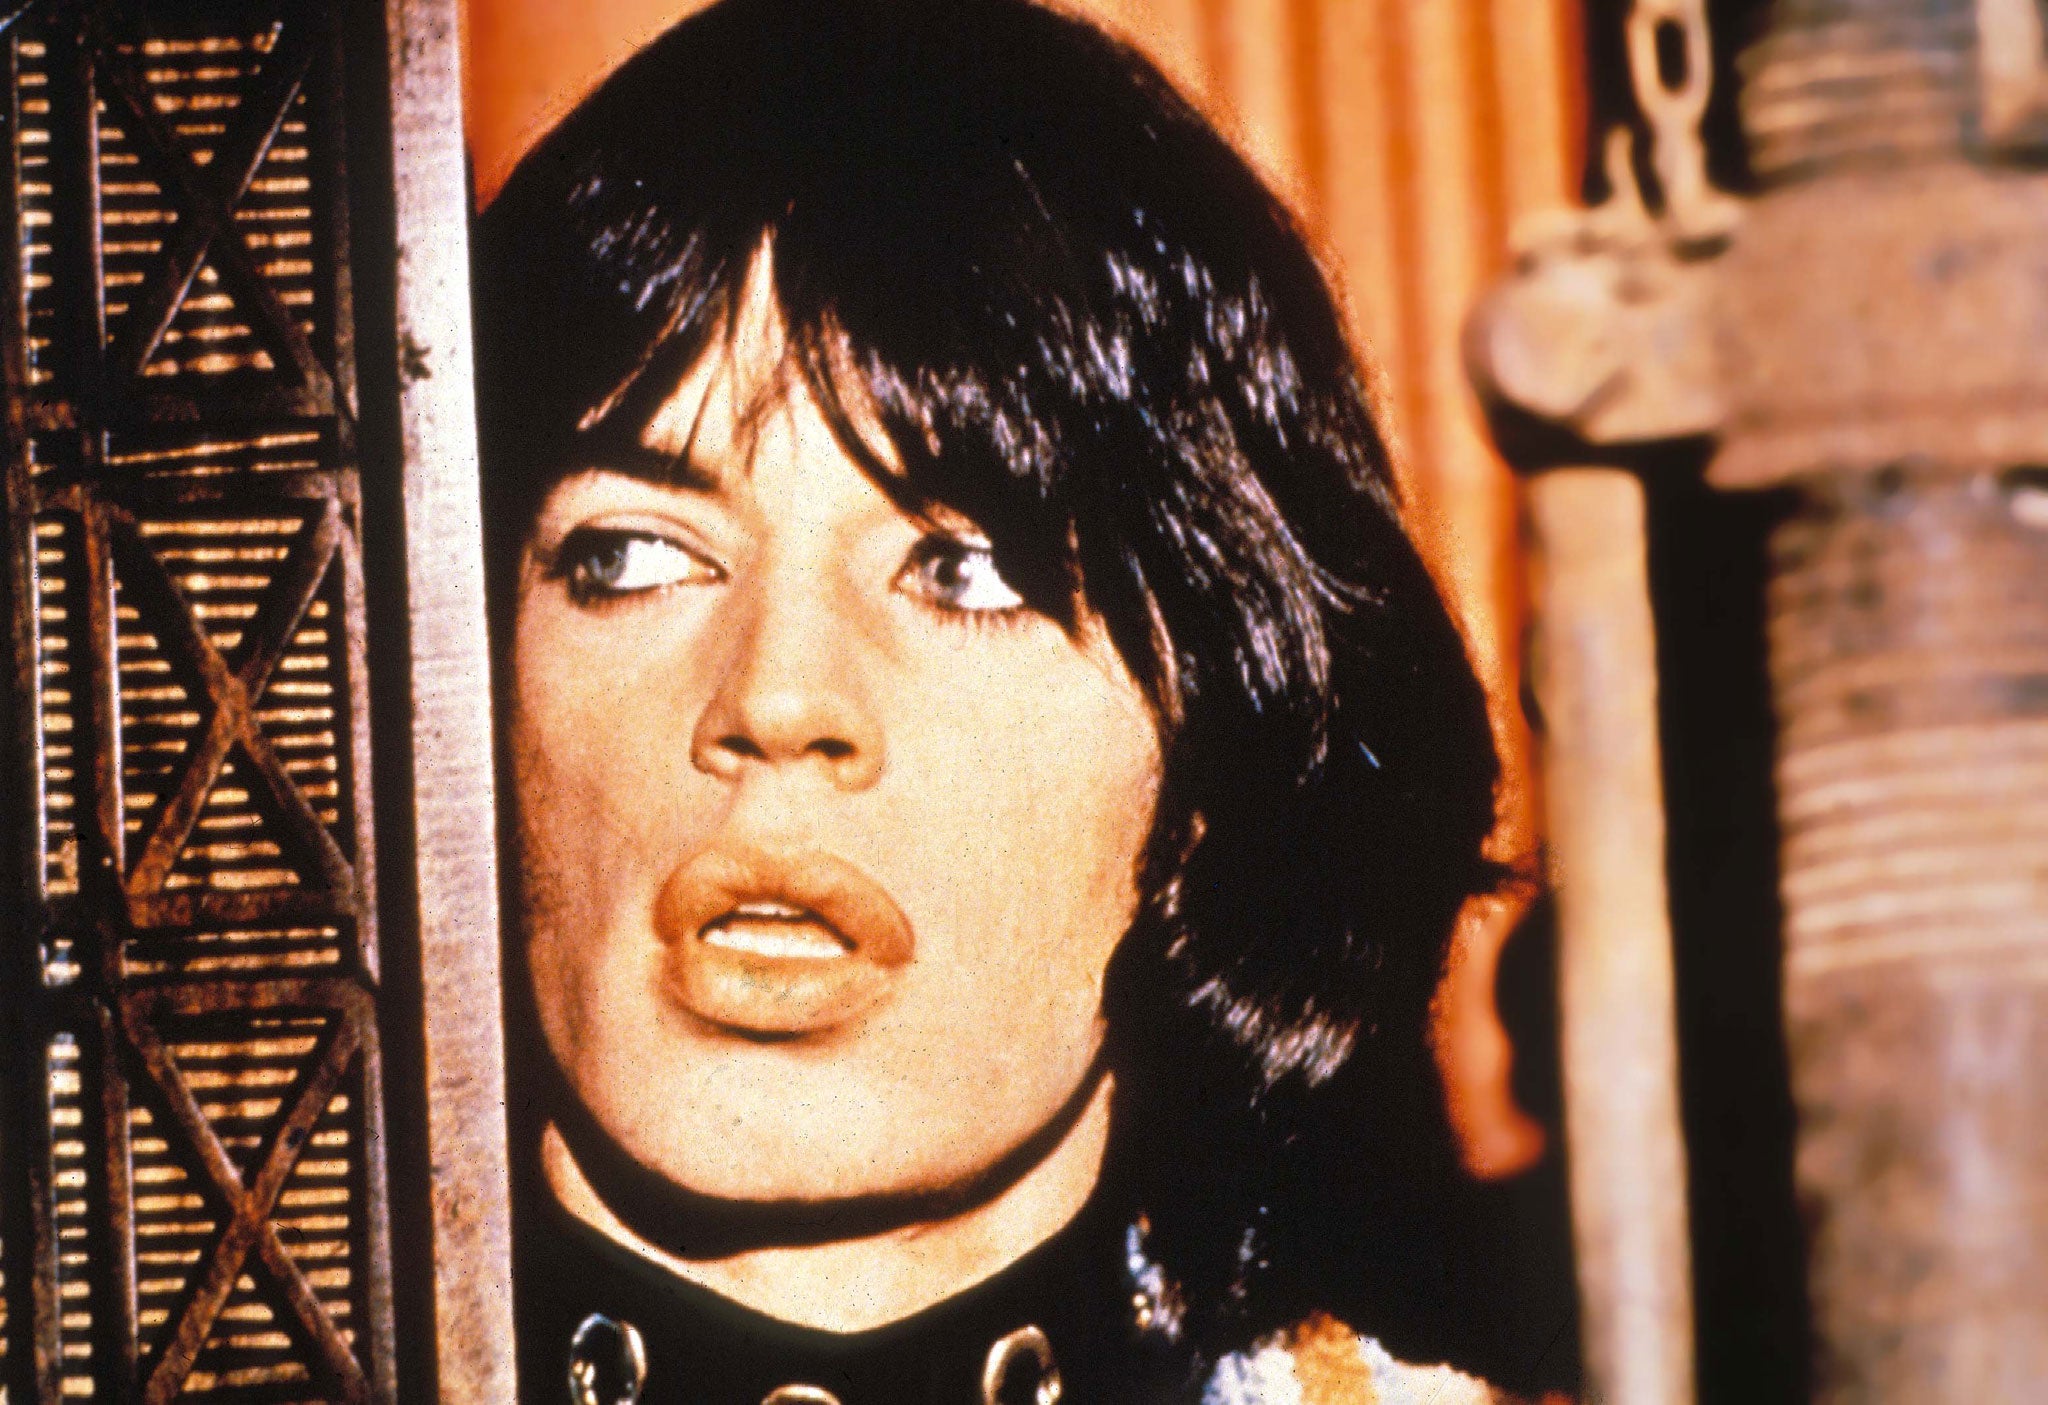 Mick Jagger, in 'Performance'